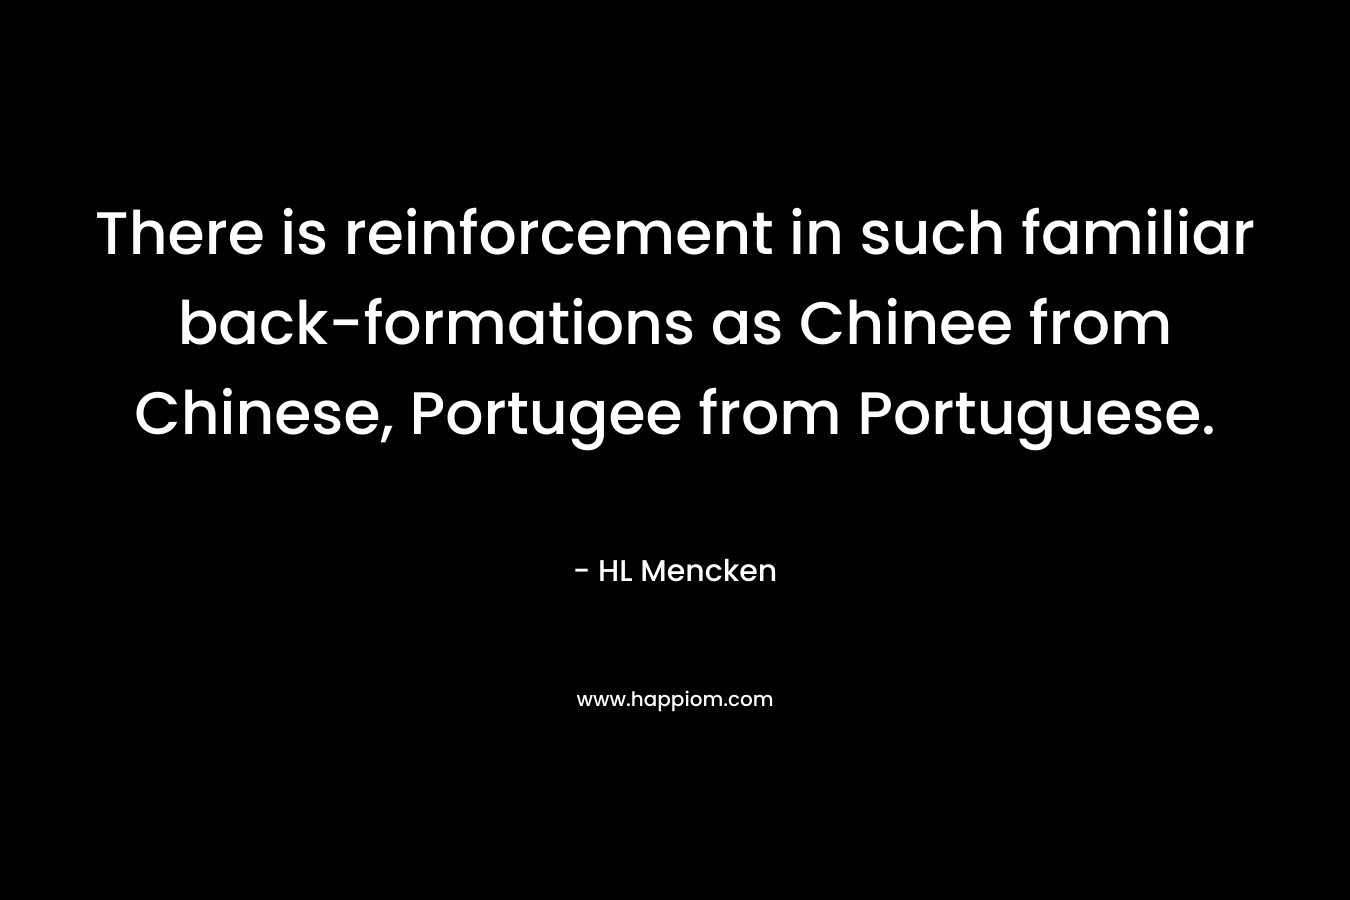 There is reinforcement in such familiar back-formations as Chinee from Chinese, Portugee from Portuguese. – HL Mencken